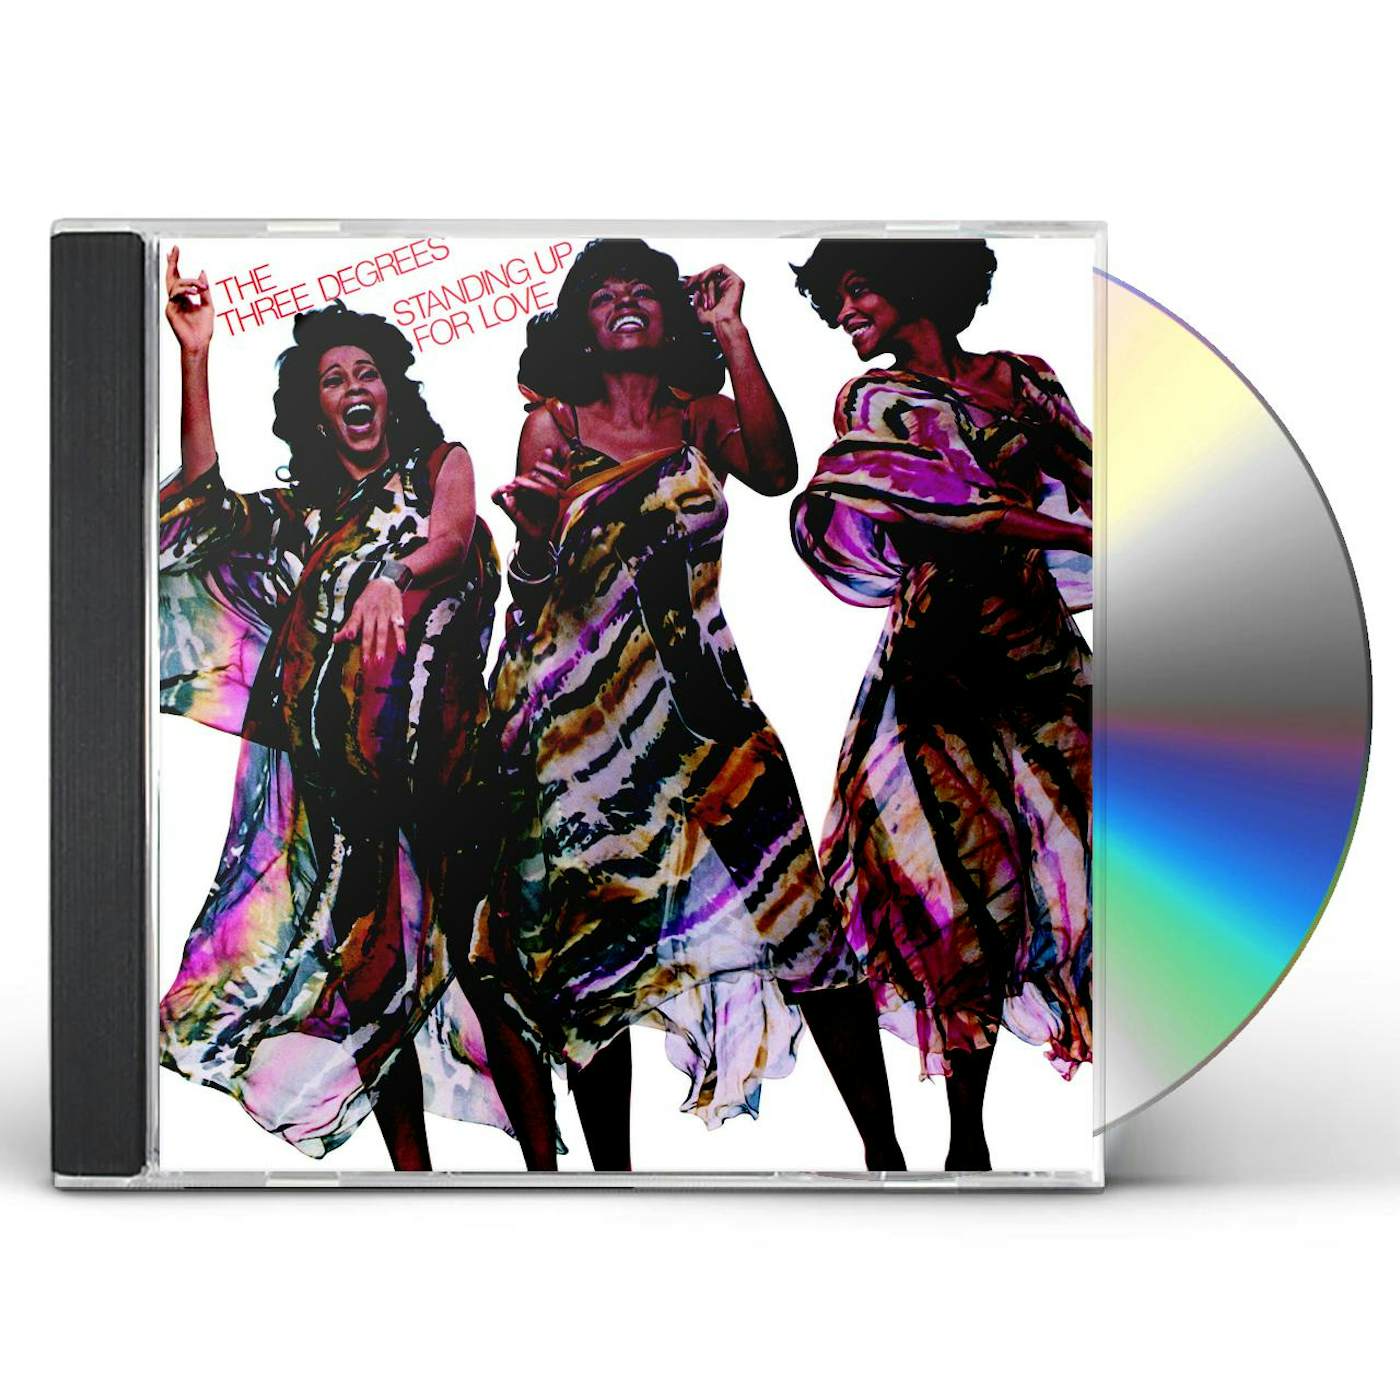 The Three Degrees STANDING UP FOR LOVE CD